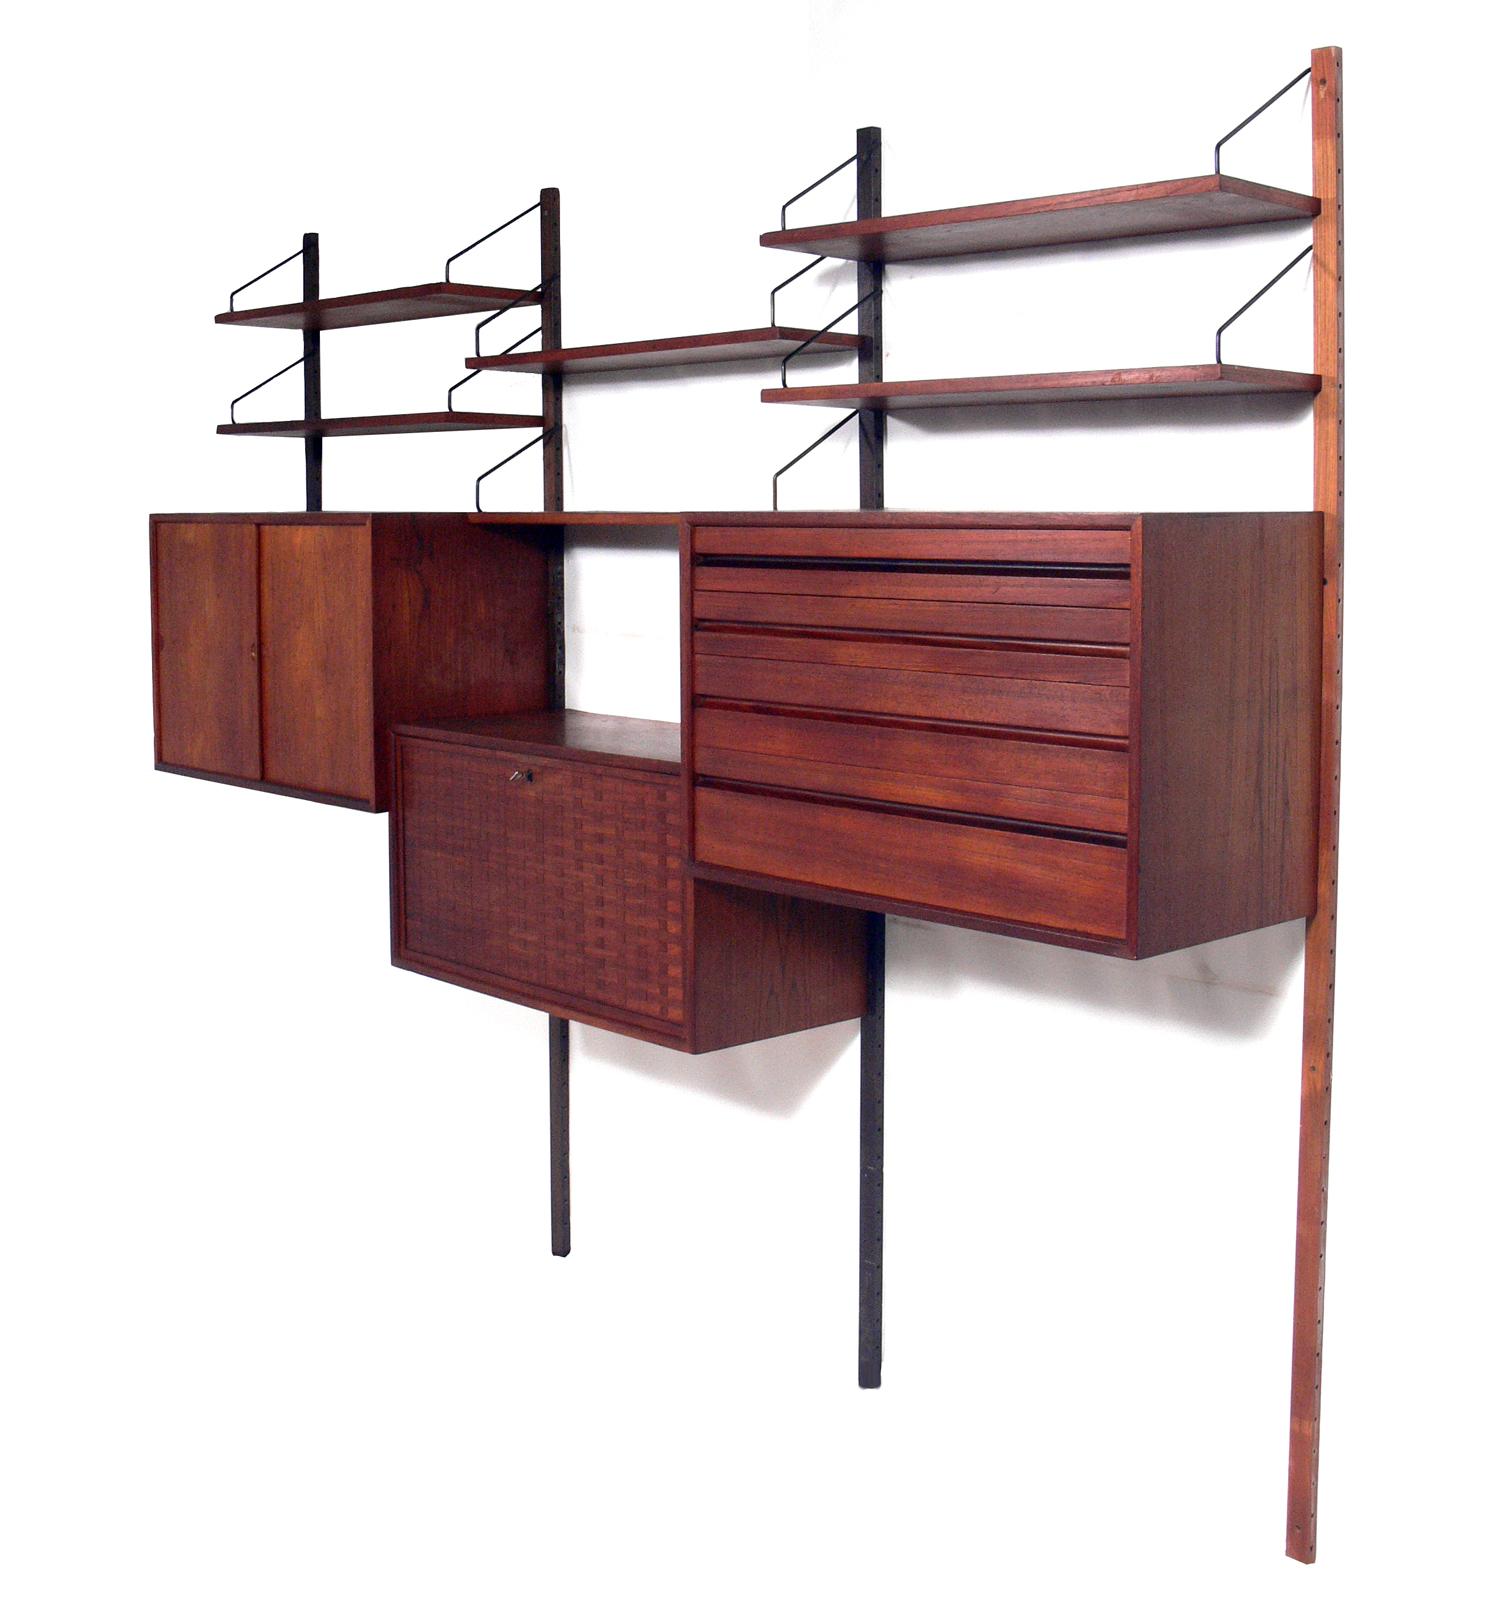 Danish modern wall unit or home office, designed by Poul Cadovius for Cado, Denmark, circa 1960s. This piece is completely adjustable, and any of the case pieces or shelves can be installed anywhere up and down the wall-mounted uprights.
This piece